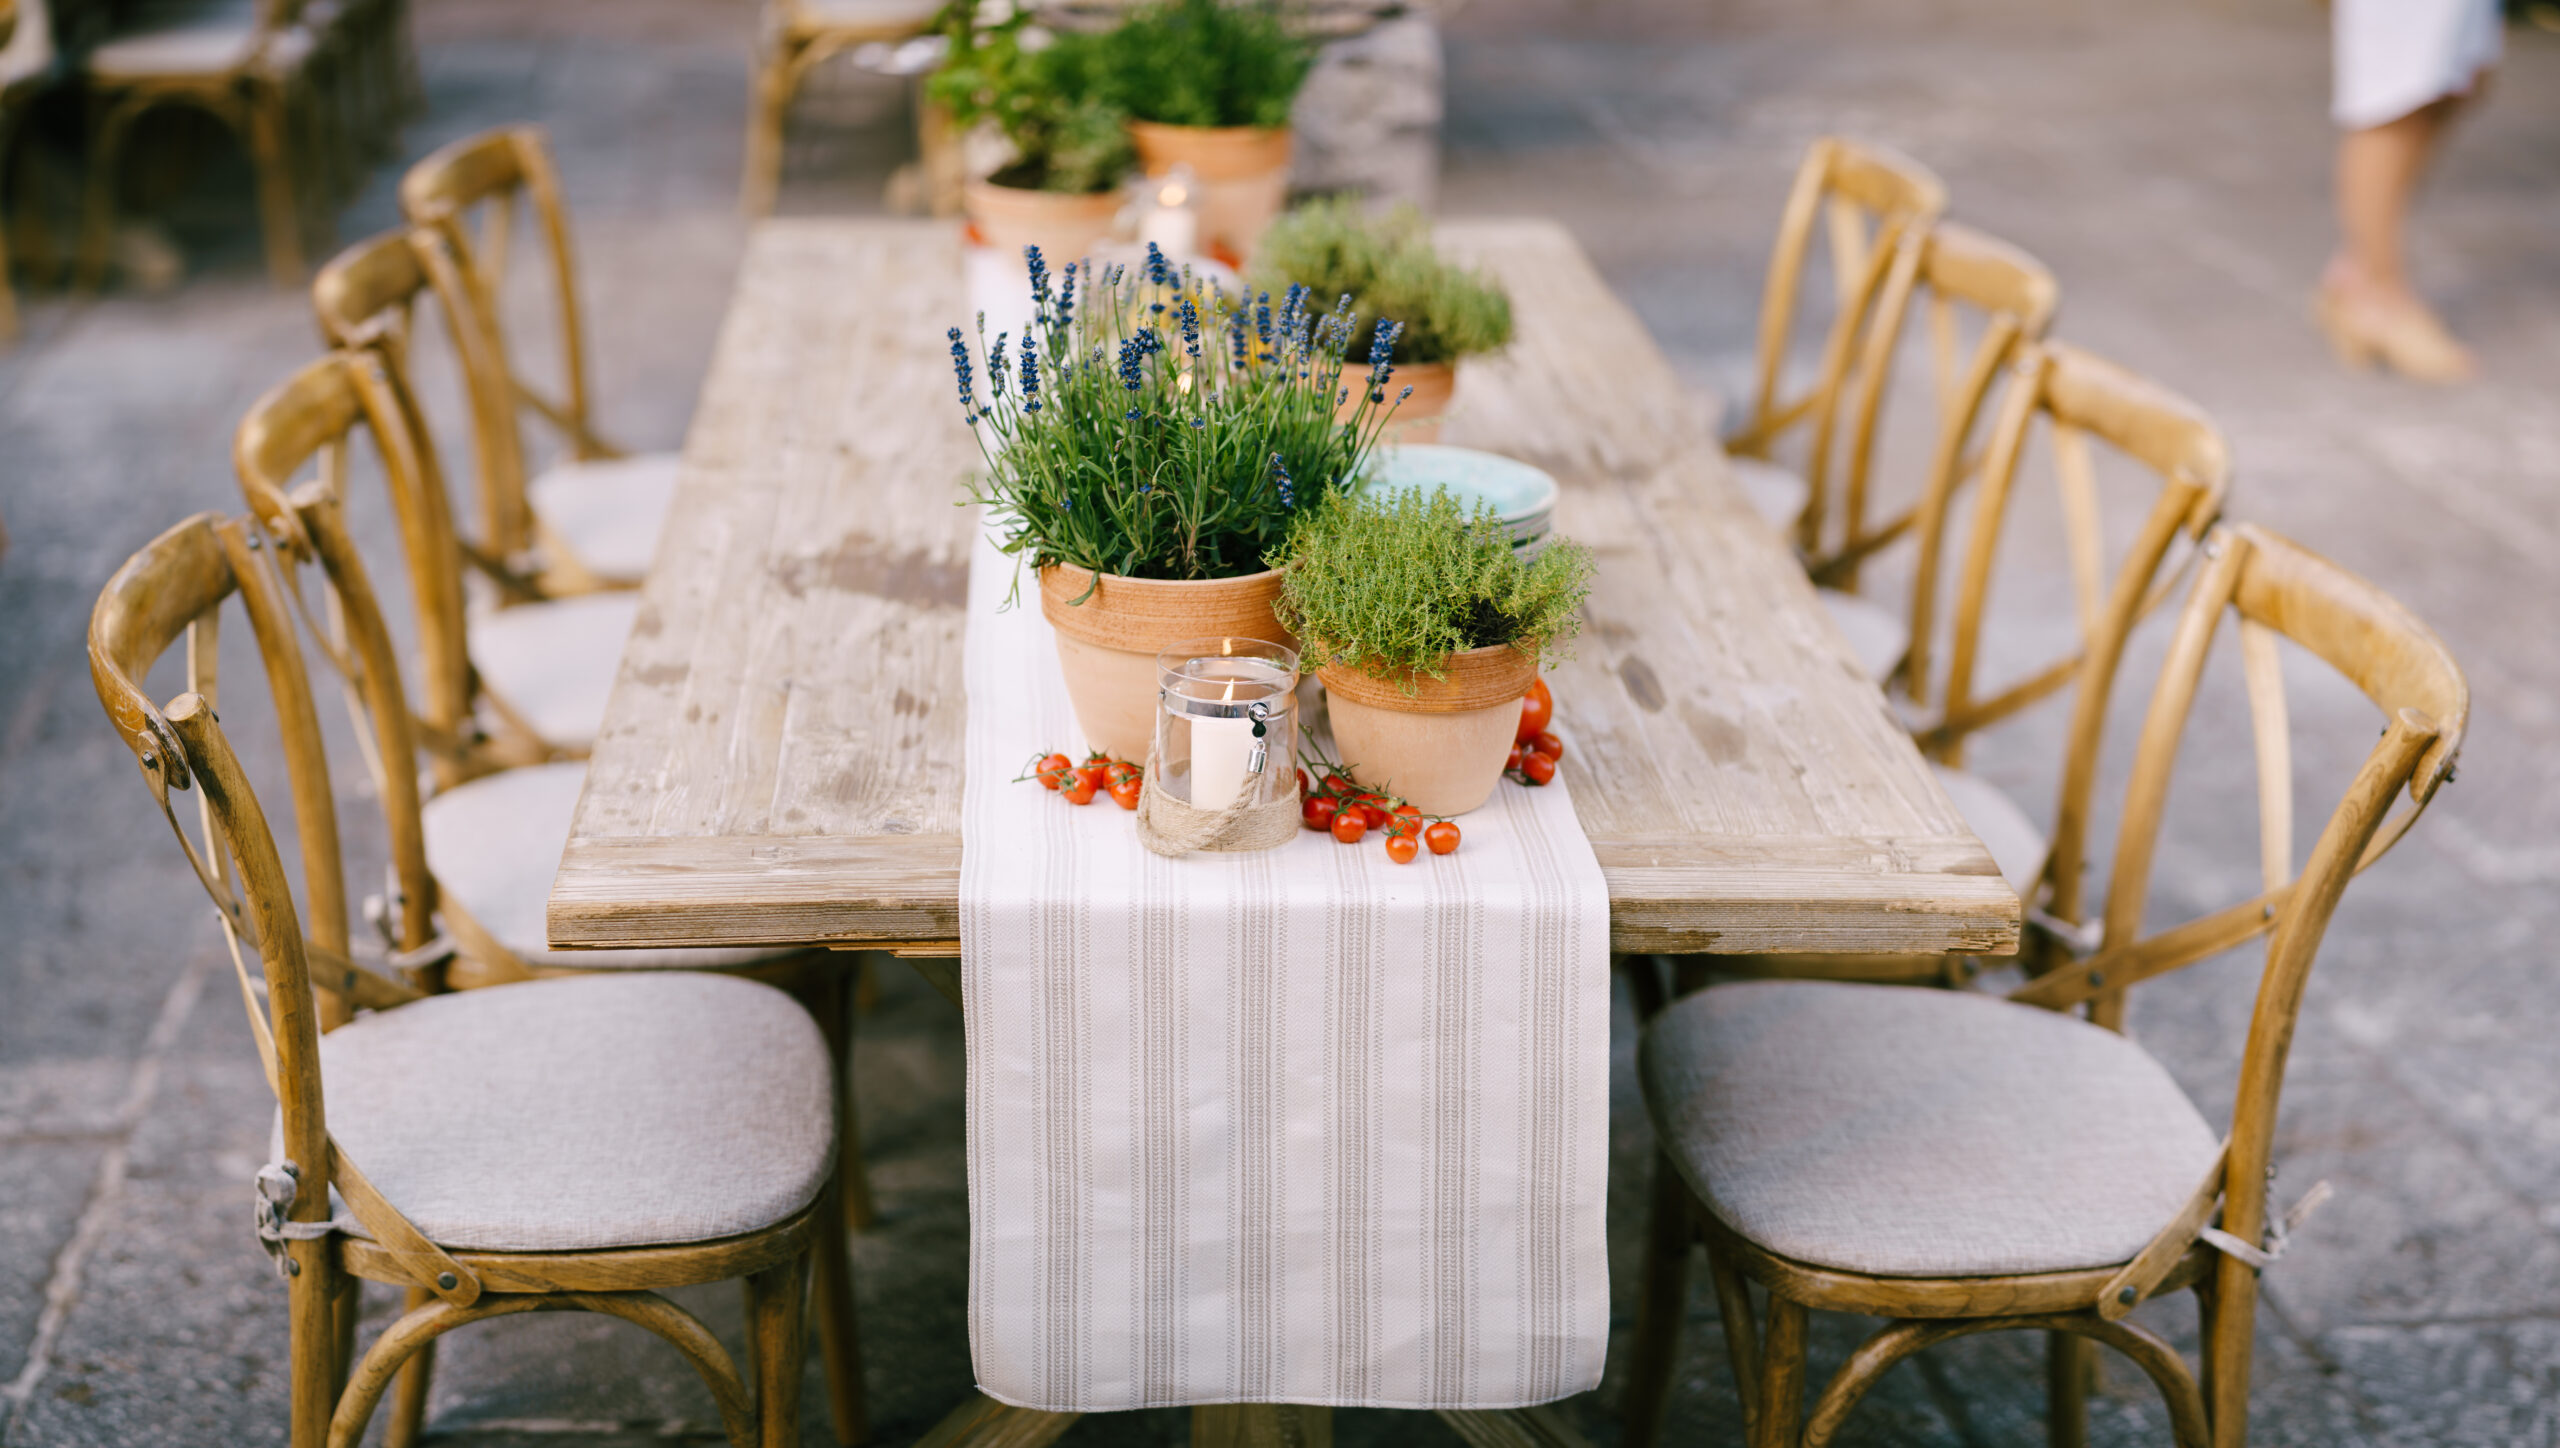 Outdoor dining table with pots of lavender and citronella candles in the center on a linen table runner